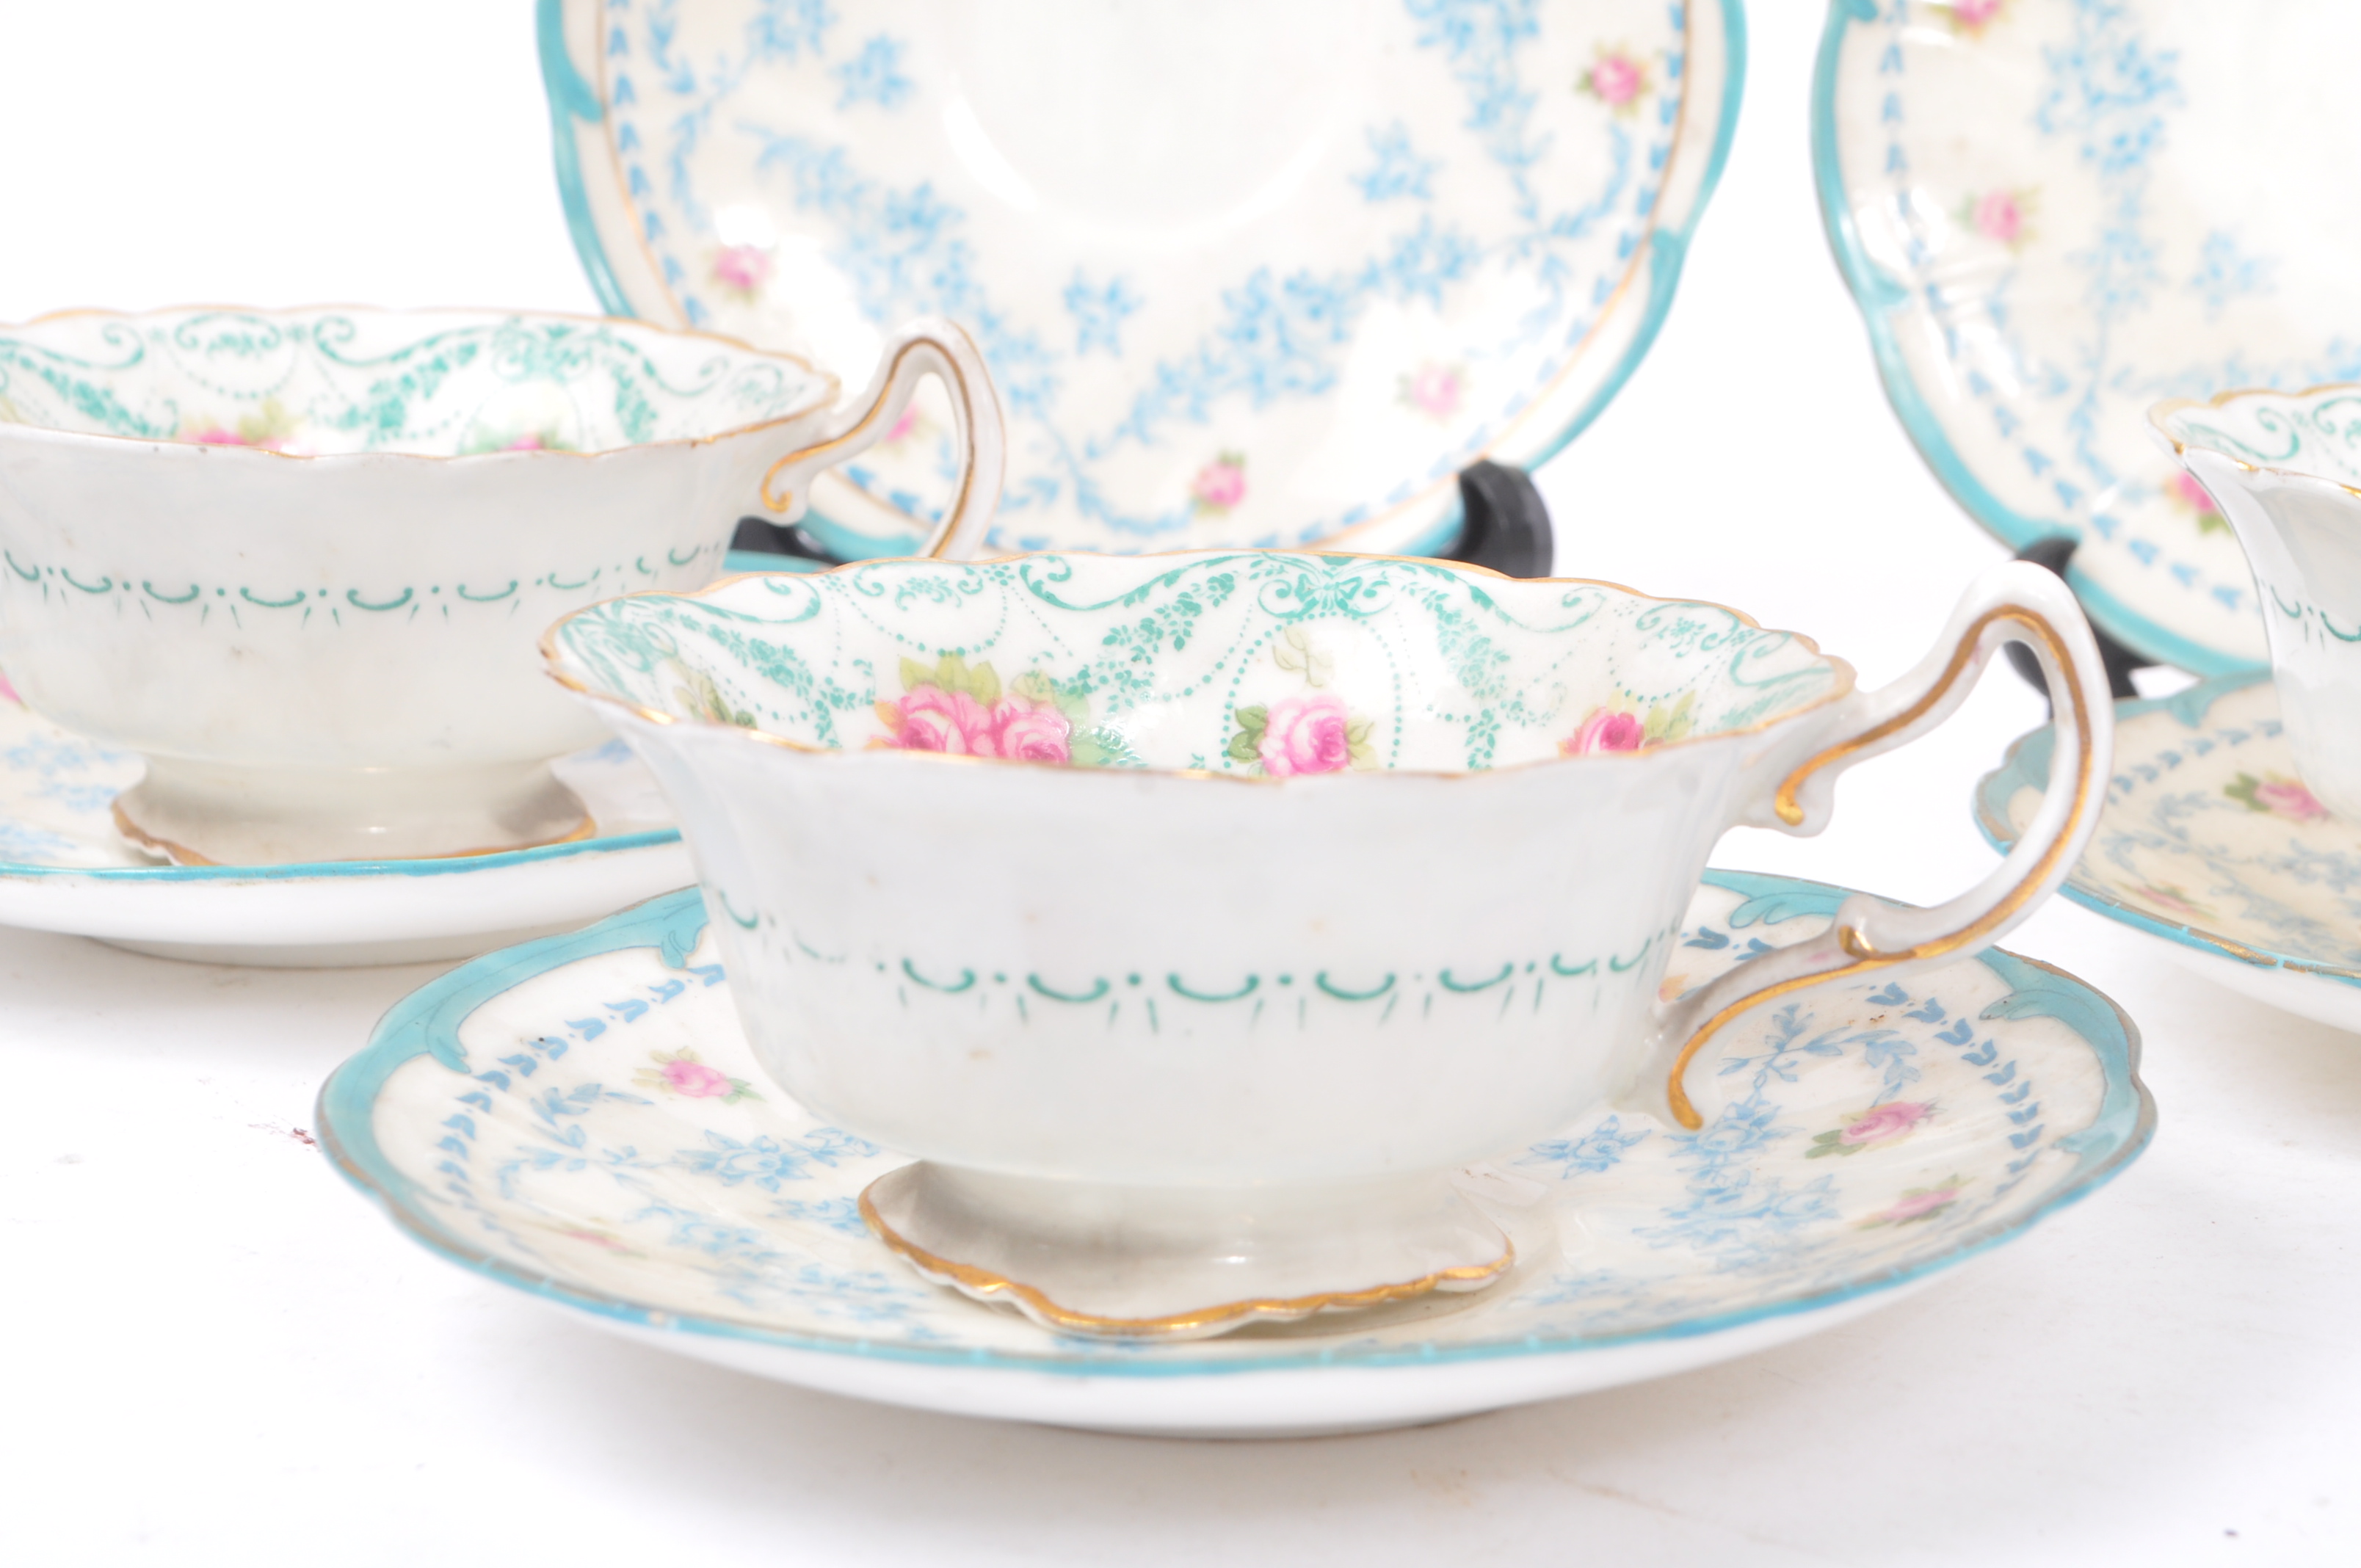 THREE EARLY 20TH CENTURY ROYAL DOULTON TEACUP & SAUCER - Image 2 of 5